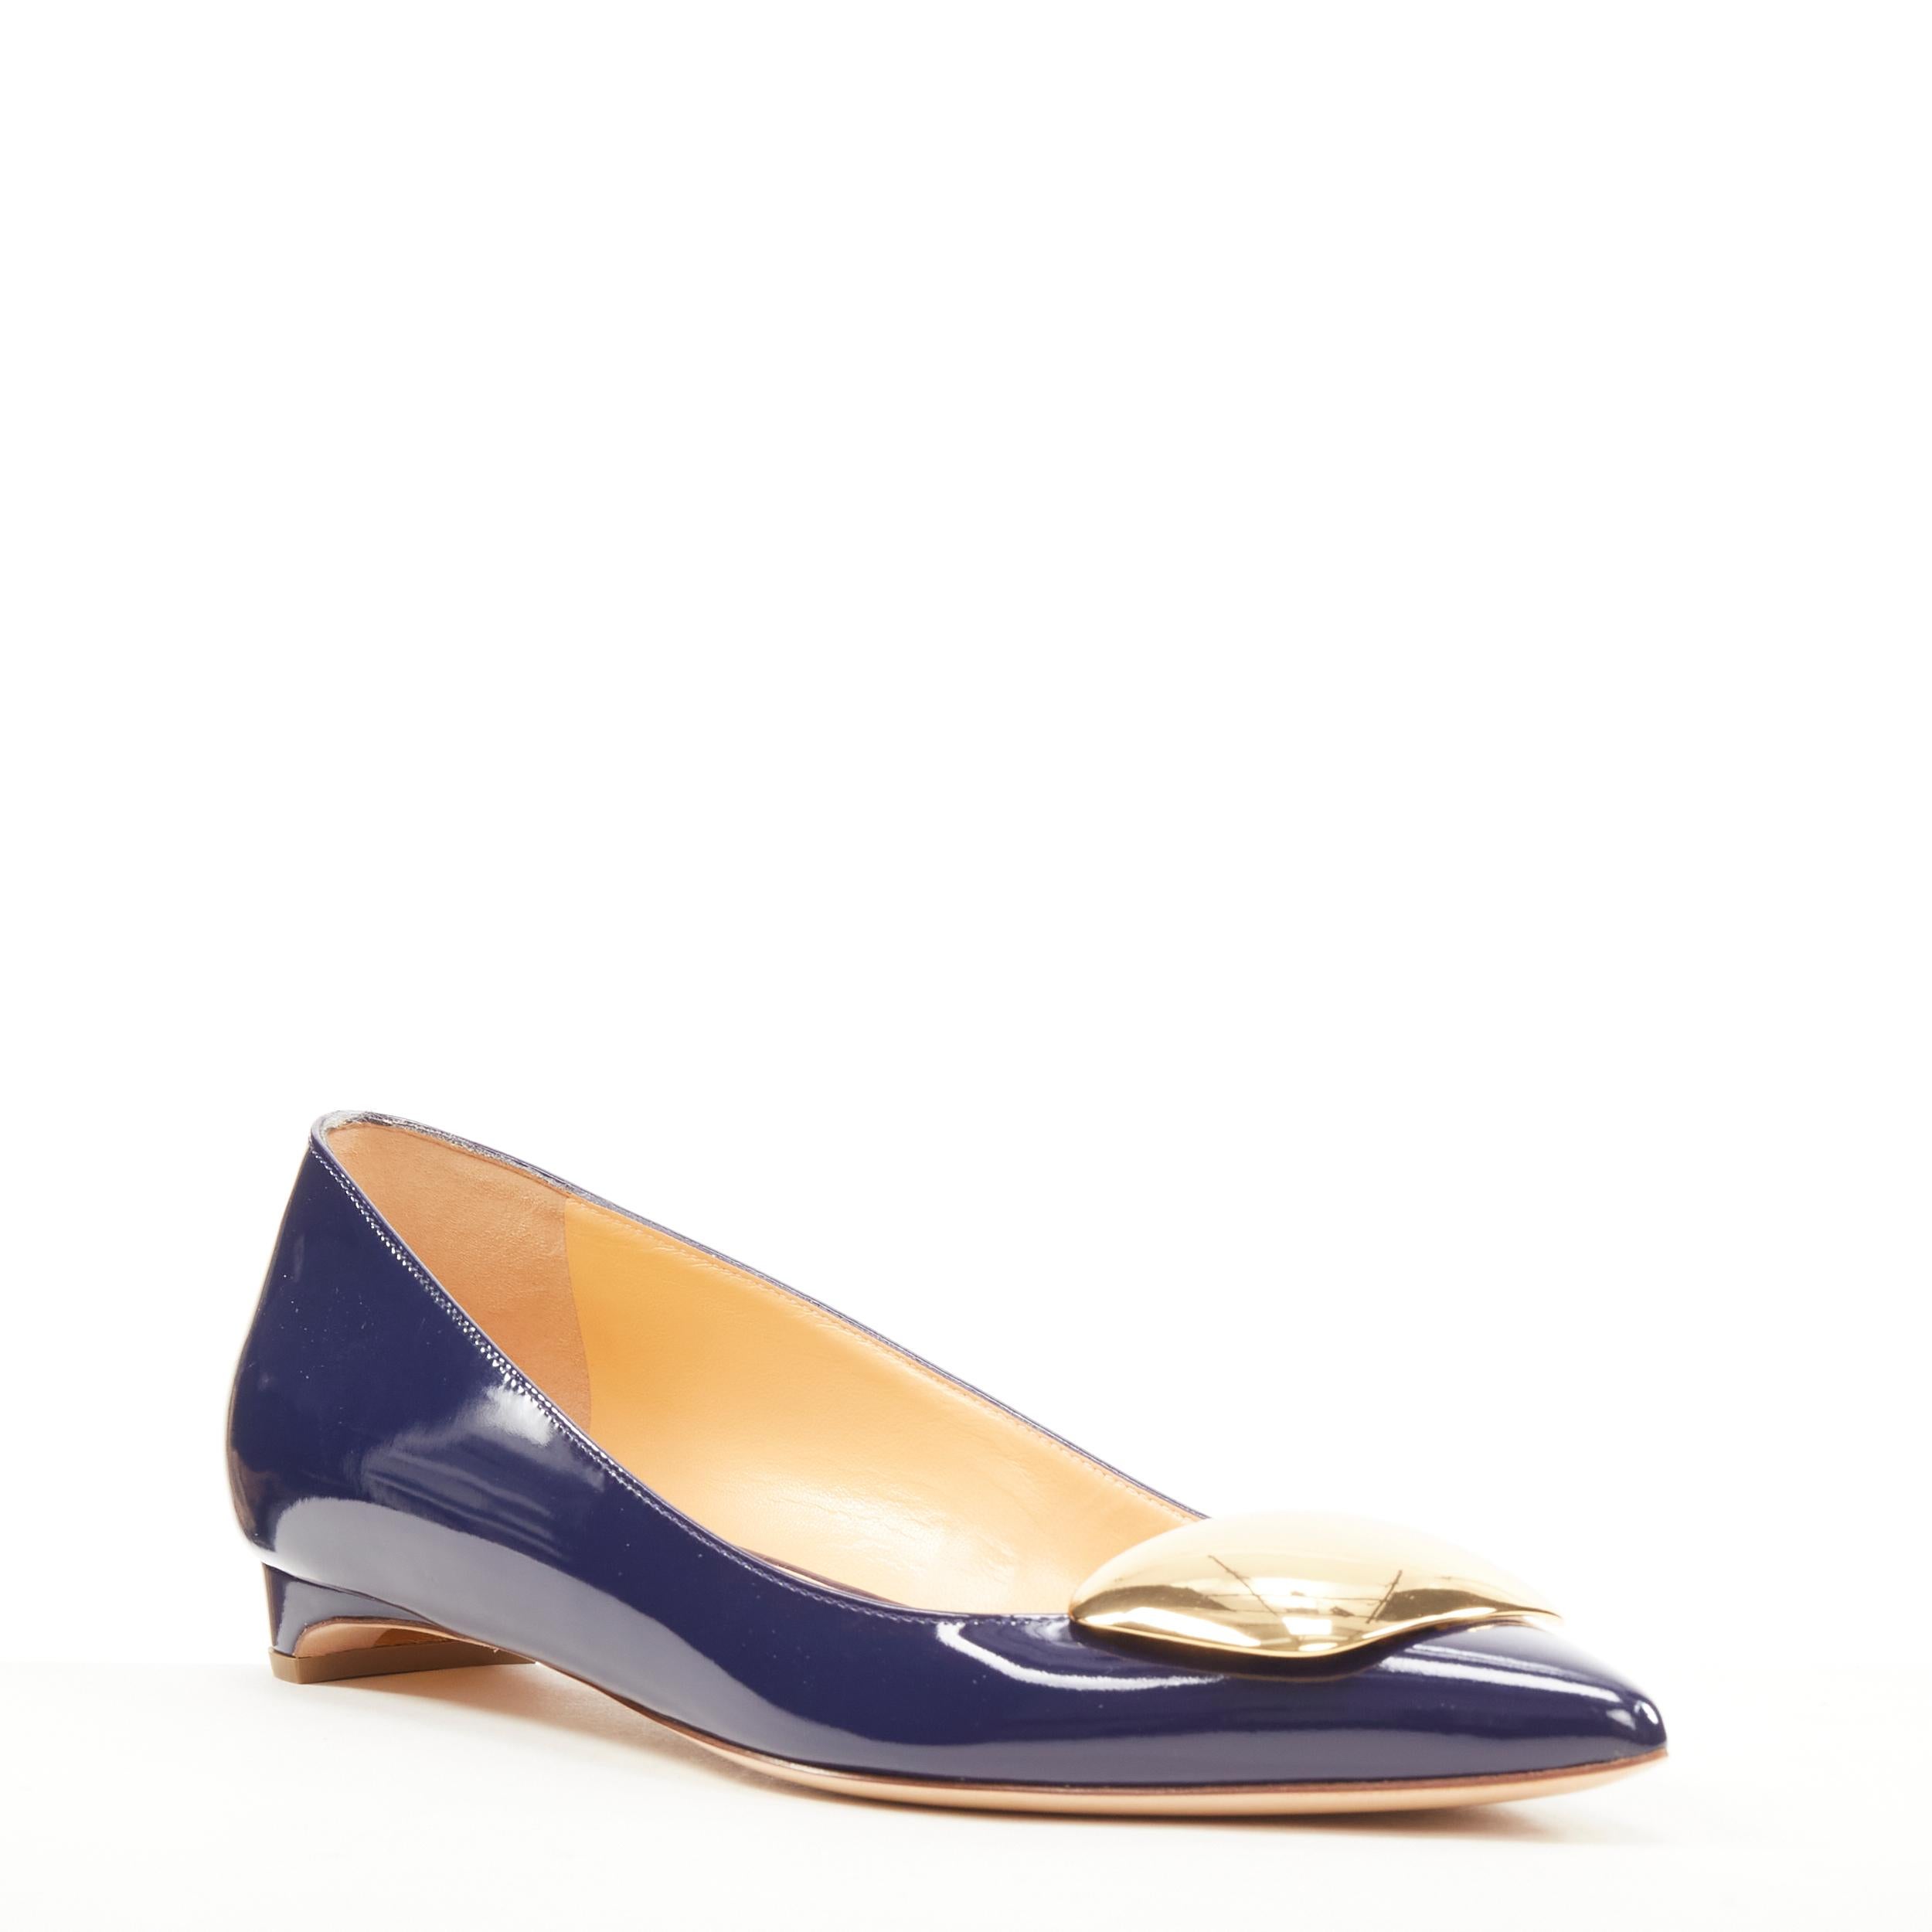 new RUPERT SANDERSON Bedfa Chrome blue patent gold brooch flats EU37.5 
Reference: SNKO/A00205 
Brand: Rupert Sanderson 
Model: Bedfa Chrome 
Material: Patent Leather 
Color: Blue 
Pattern: Solid 
Extra Detail: Gold chrome metal detail at toe.